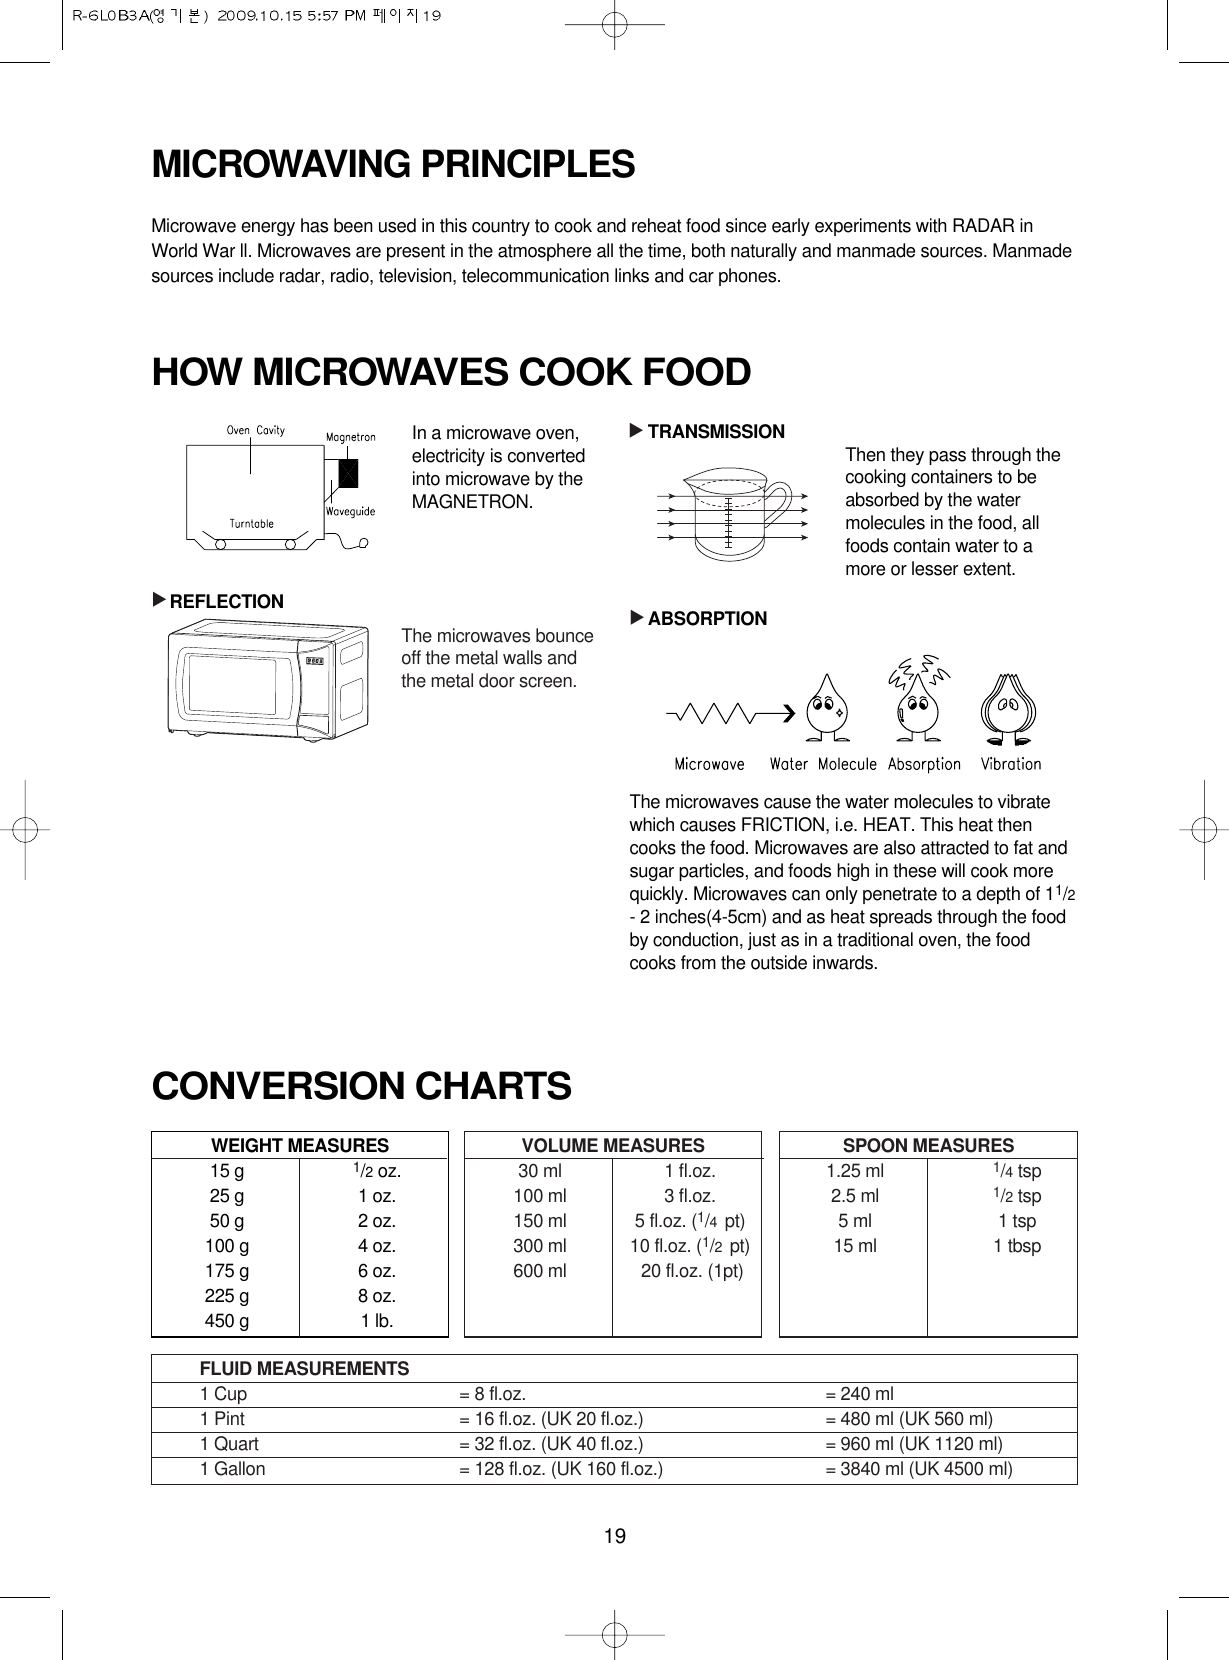 19MICROWAVING PRINCIPLESMicrowave energy has been used in this country to cook and reheat food since early experiments with RADAR inWorld War ll. Microwaves are present in the atmosphere all the time, both naturally and manmade sources. Manmadesources include radar, radio, television, telecommunication links and car phones.CONVERSION CHARTSIn a microwave oven,electricity is convertedinto microwave by theMAGNETRON.REFLECTIONTRANSMISSION Then they pass through thecooking containers to beabsorbed by the watermolecules in the food, allfoods contain water to amore or lesser extent.ABSORPTIONThe microwaves cause the water molecules to vibratewhich causes FRICTION, i.e. HEAT. This heat thencooks the food. Microwaves are also attracted to fat andsugar particles, and foods high in these will cook morequickly. Microwaves can only penetrate to a depth of 11/2- 2 inches(4-5cm) and as heat spreads through the foodby conduction, just as in a traditional oven, the foodcooks from the outside inwards.WEIGHT MEASURES15 g 1/2oz.25 g 1 oz.50 g 2 oz.100 g 4 oz.175 g 6 oz.225 g 8 oz.450 g 1 lb.HOW MICROWAVES COOK FOOD▲▲▲VOLUME MEASURES30 ml 1 fl.oz.100 ml 3 fl.oz.150 ml 5 fl.oz. (1/4  pt)300 ml 10 fl.oz. (1/2  pt)600 ml 20 fl.oz. (1pt)SPOON MEASURES1.25 ml 1/4tsp2.5 ml 1/2tsp5 ml 1 tsp15 ml 1 tbspFLUID MEASUREMENTS1 Cup = 8 fl.oz. = 240 ml1 Pint = 16 fl.oz. (UK 20 fl.oz.) = 480 ml (UK 560 ml)1 Quart = 32 fl.oz. (UK 40 fl.oz.) = 960 ml (UK 1120 ml)1 Gallon = 128 fl.oz. (UK 160 fl.oz.) = 3840 ml (UK 4500 ml)The microwaves bounceoff the metal walls andthe metal door screen.